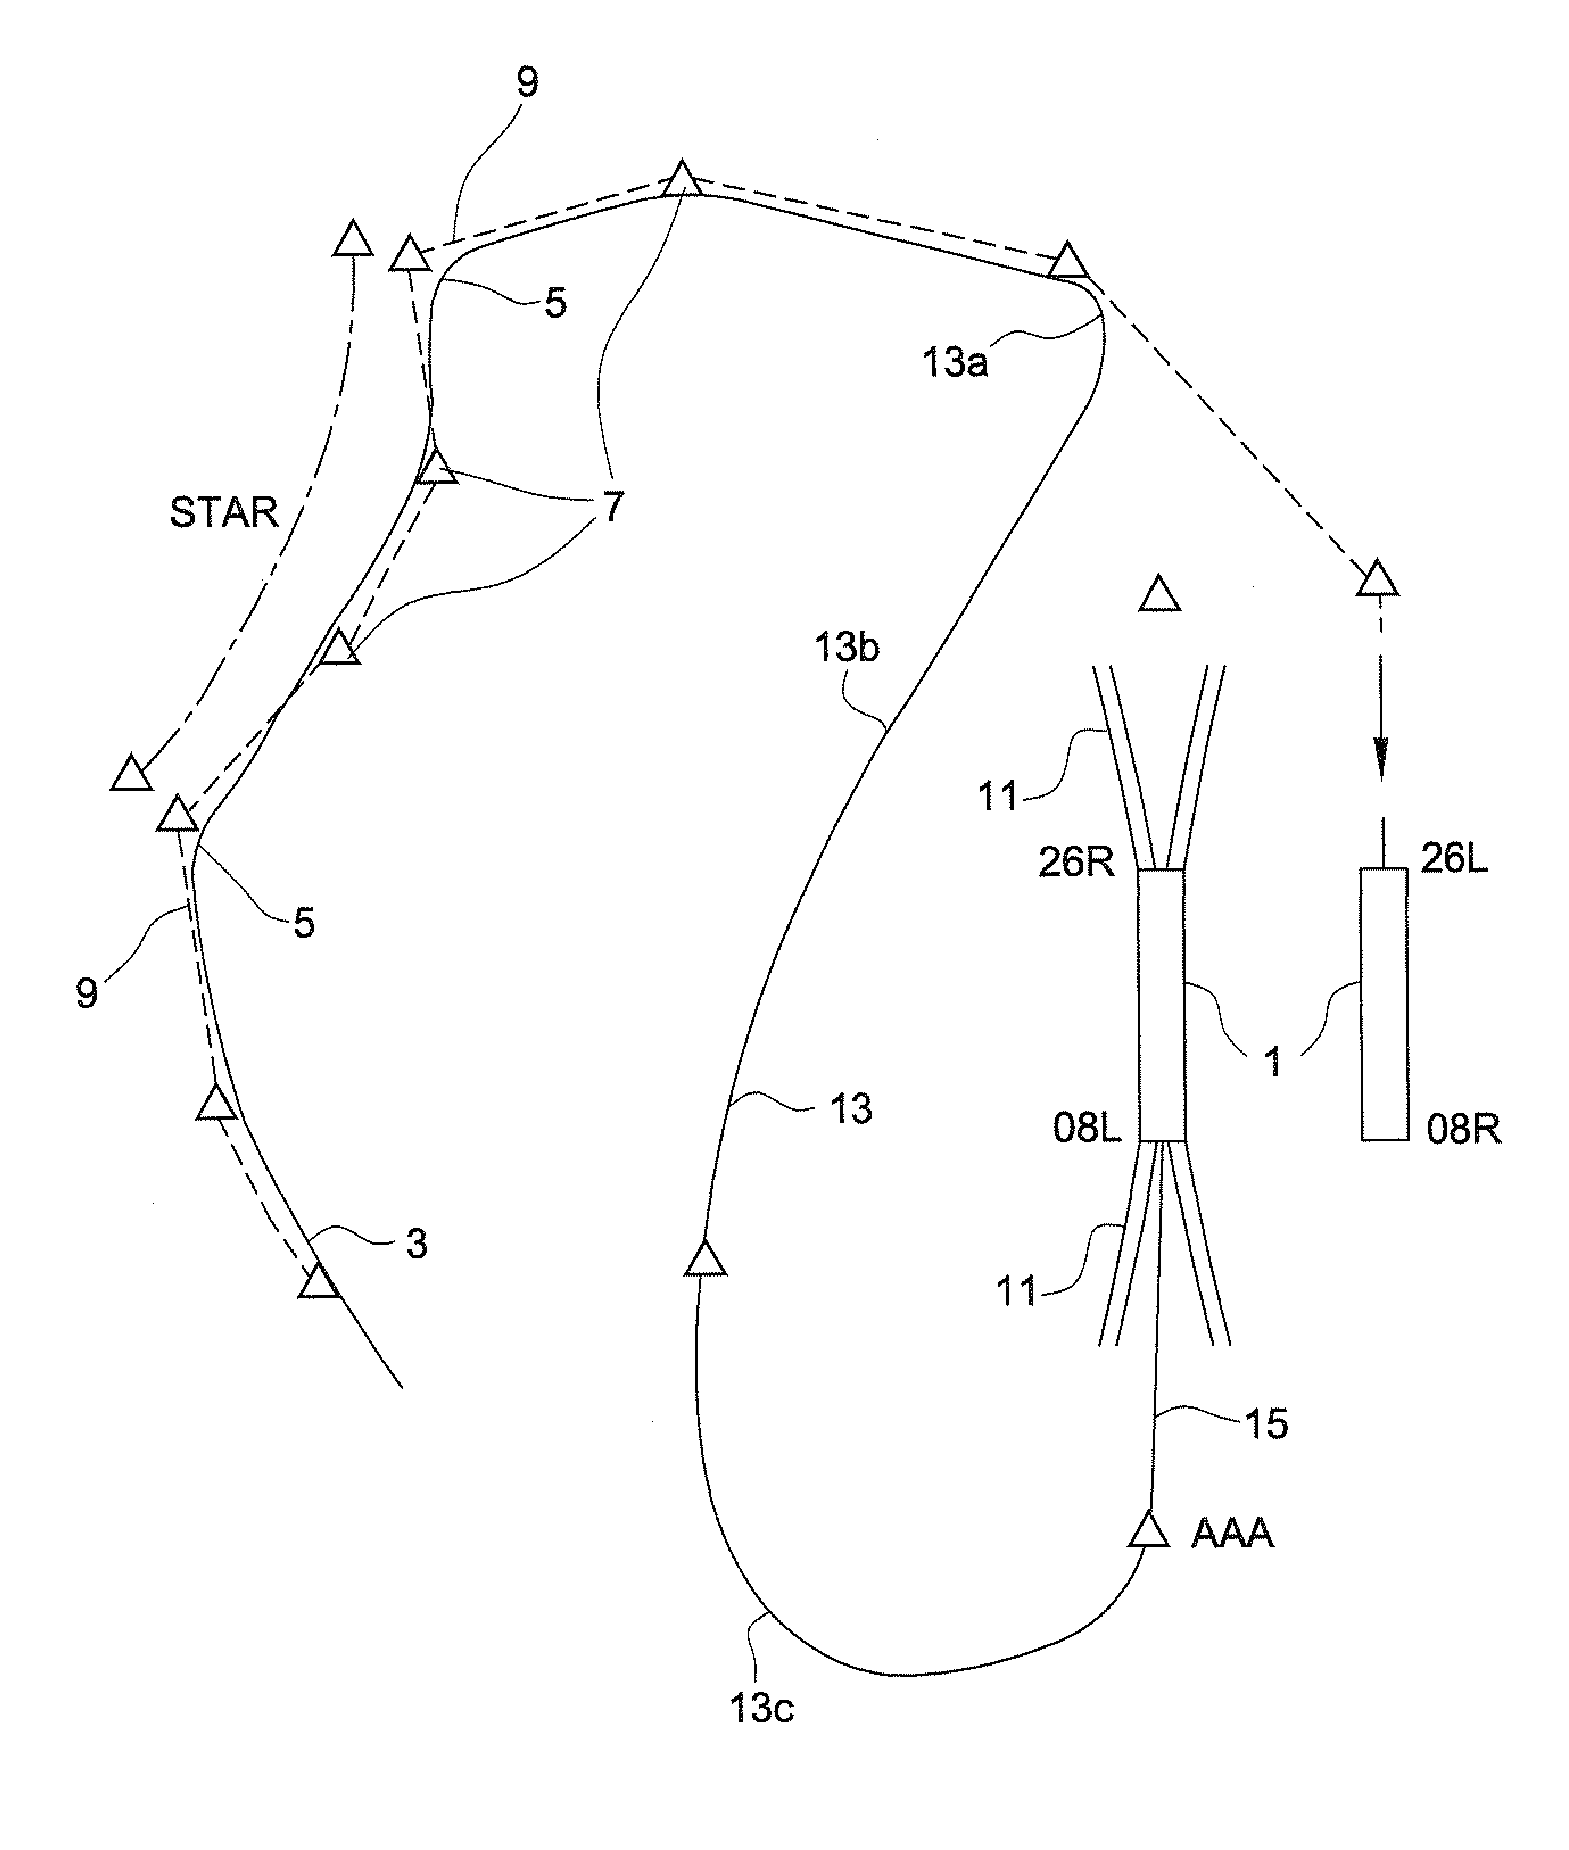 Method of Changing the Approach Procedure of an Aircraft